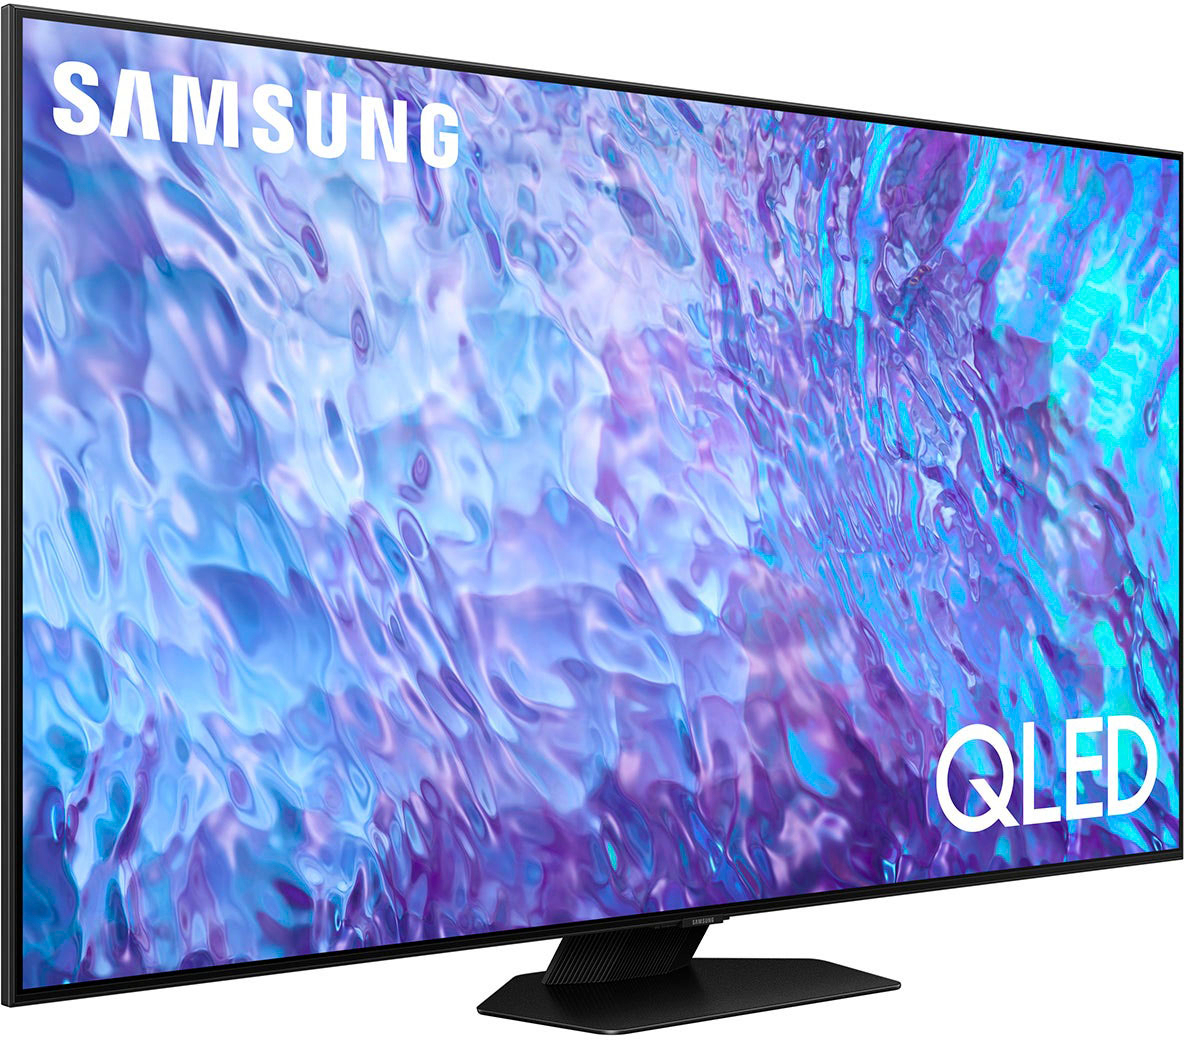 SAMSUNG 65-Inch Class QLED 4K UHD Q70A Series Dual LED Quantum HDR Smart TV  with Alexa Built-In, Motion Xcelerator Turbo+, Multi View Screen